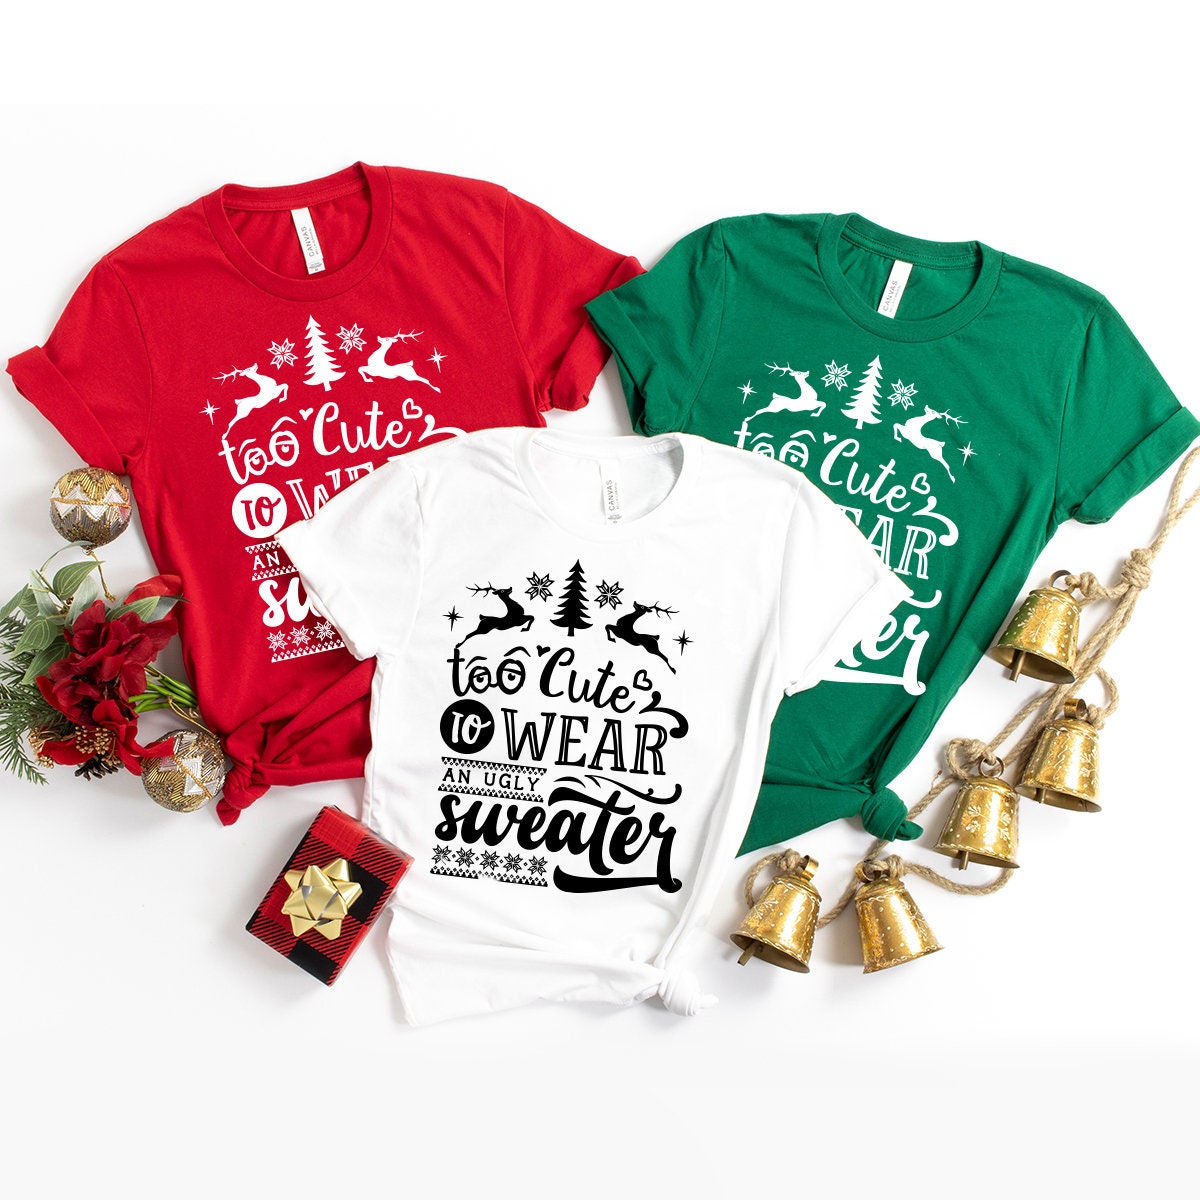 Too Cute To Wear Ugly Sweaters, Matching Christmas Shirts, Family Christmas Shirt, Christmas 2022 Shirt, Xmas Party Shirt, Funny Santa Shirt - Fastdeliverytees.com